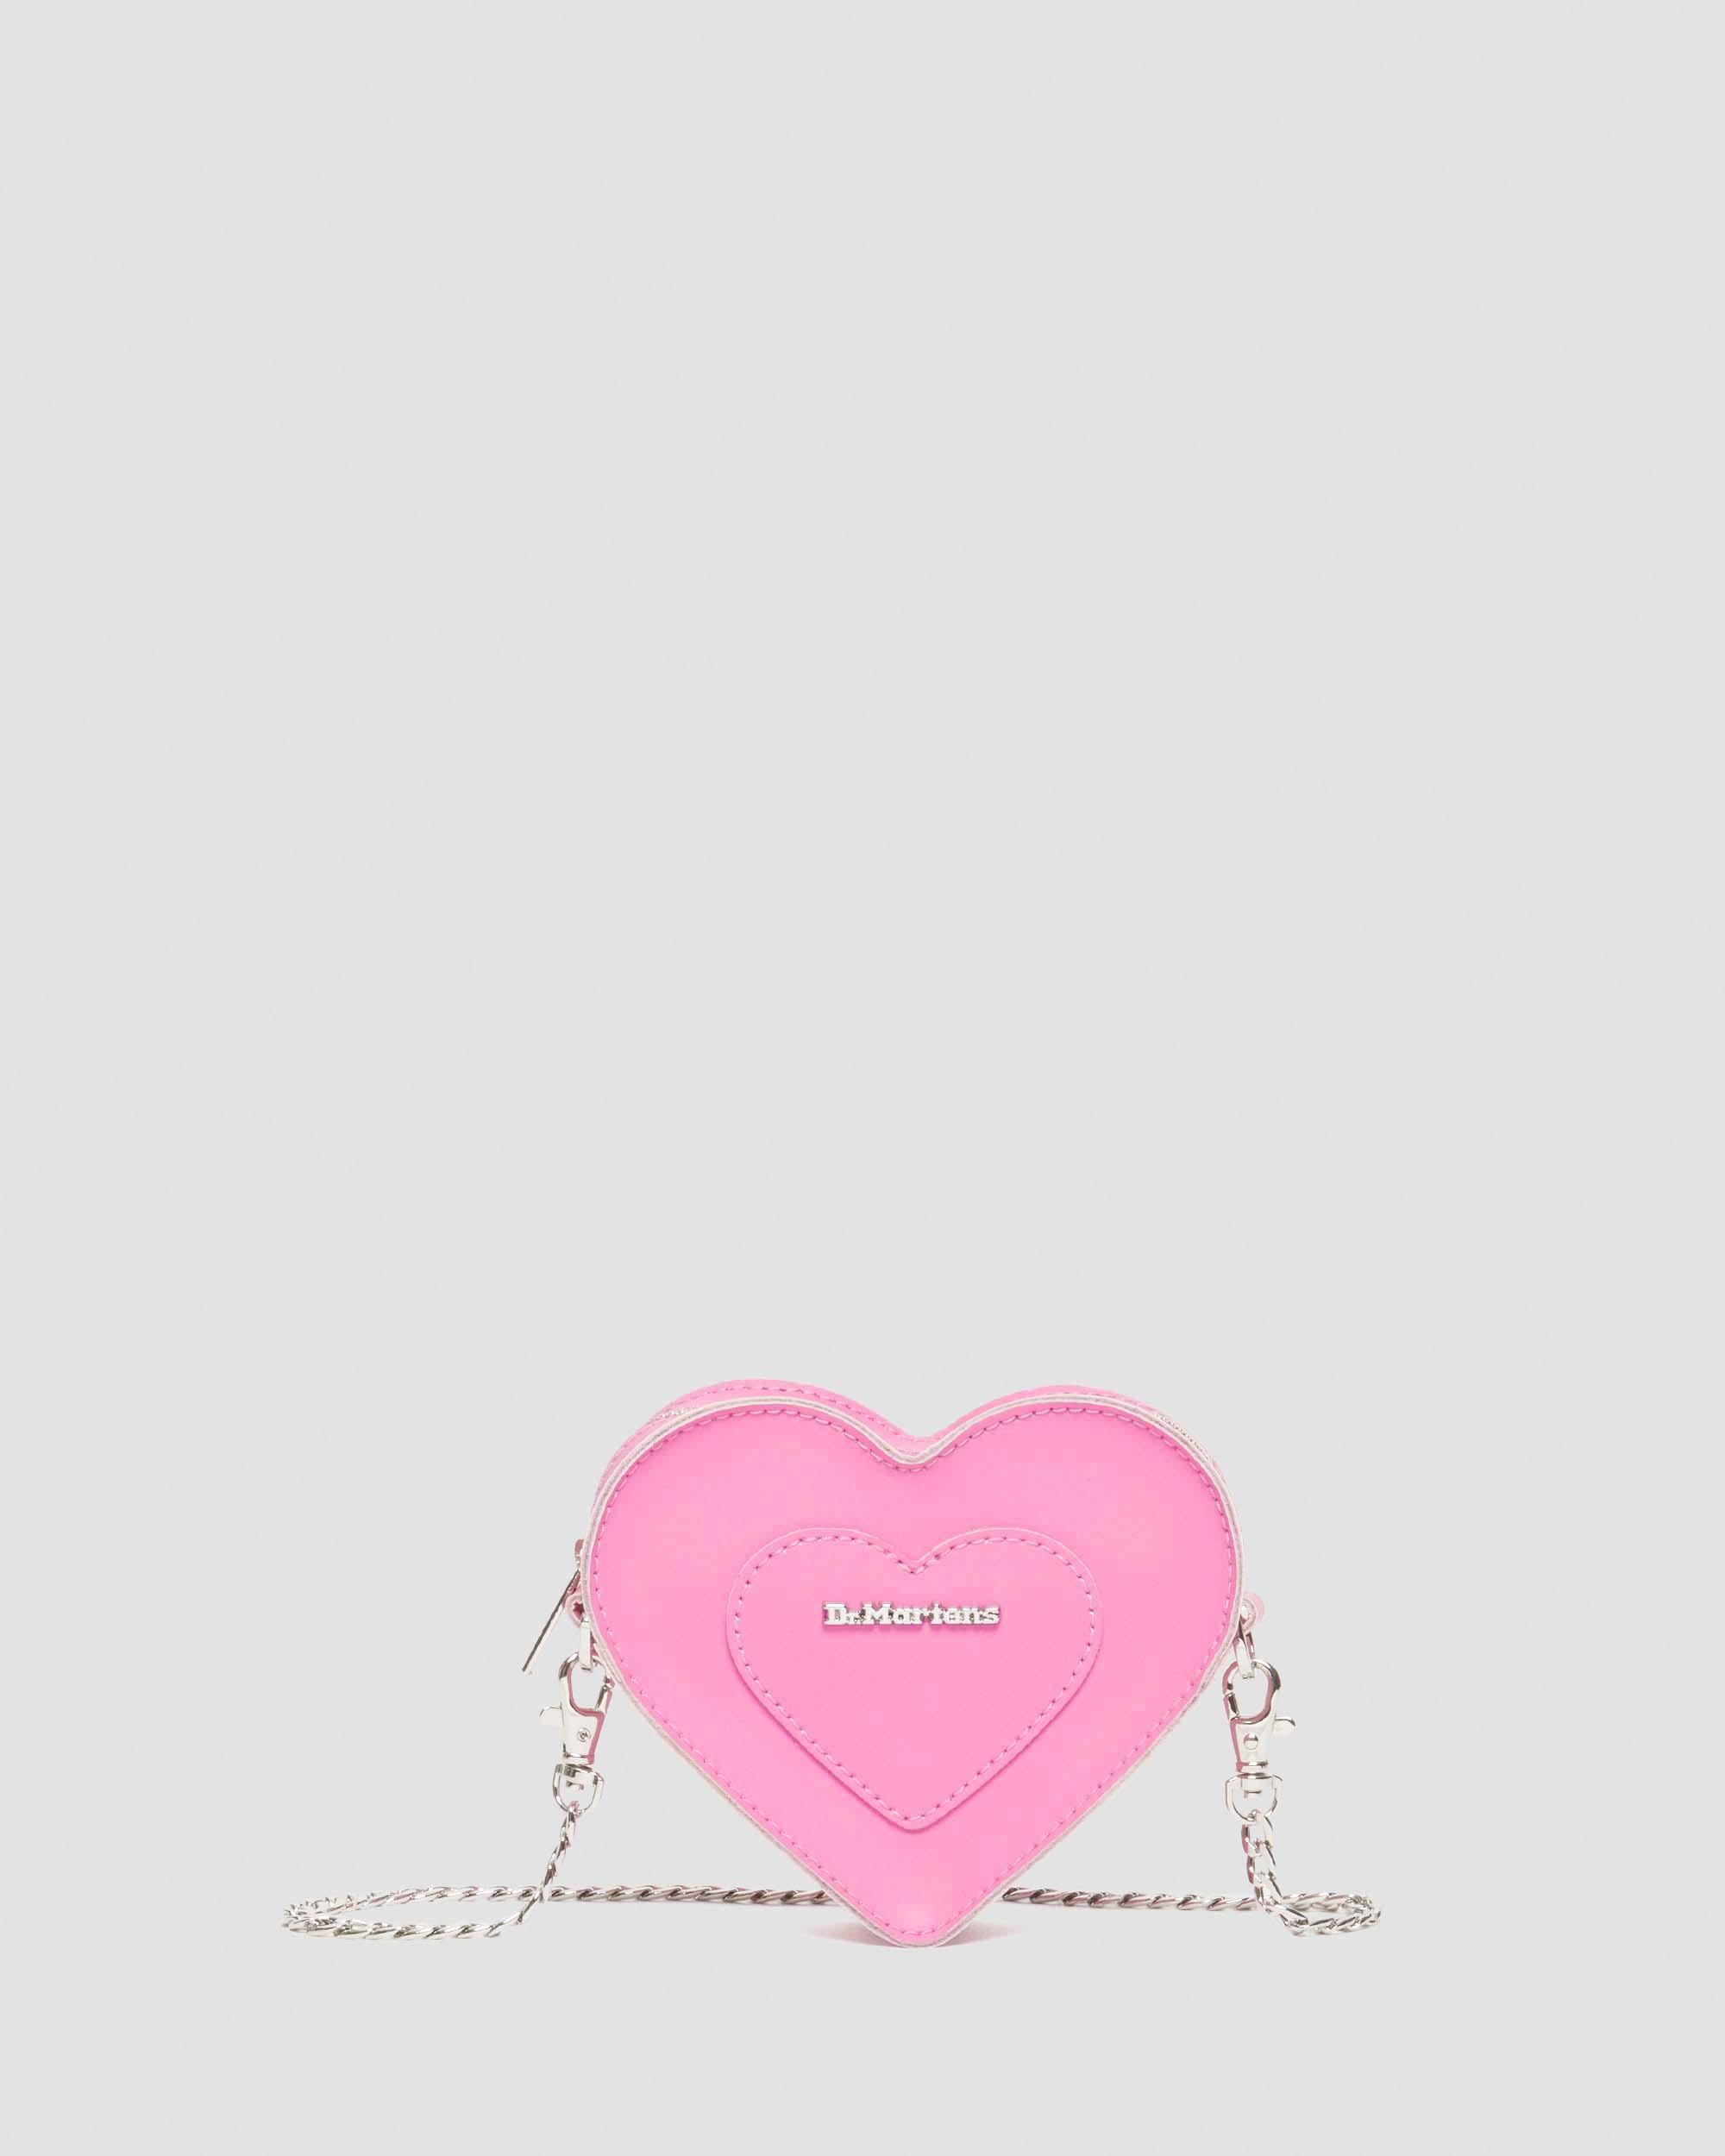 Mini Heart Shaped Leather Bag in Fondant Pink | Dr. Martens